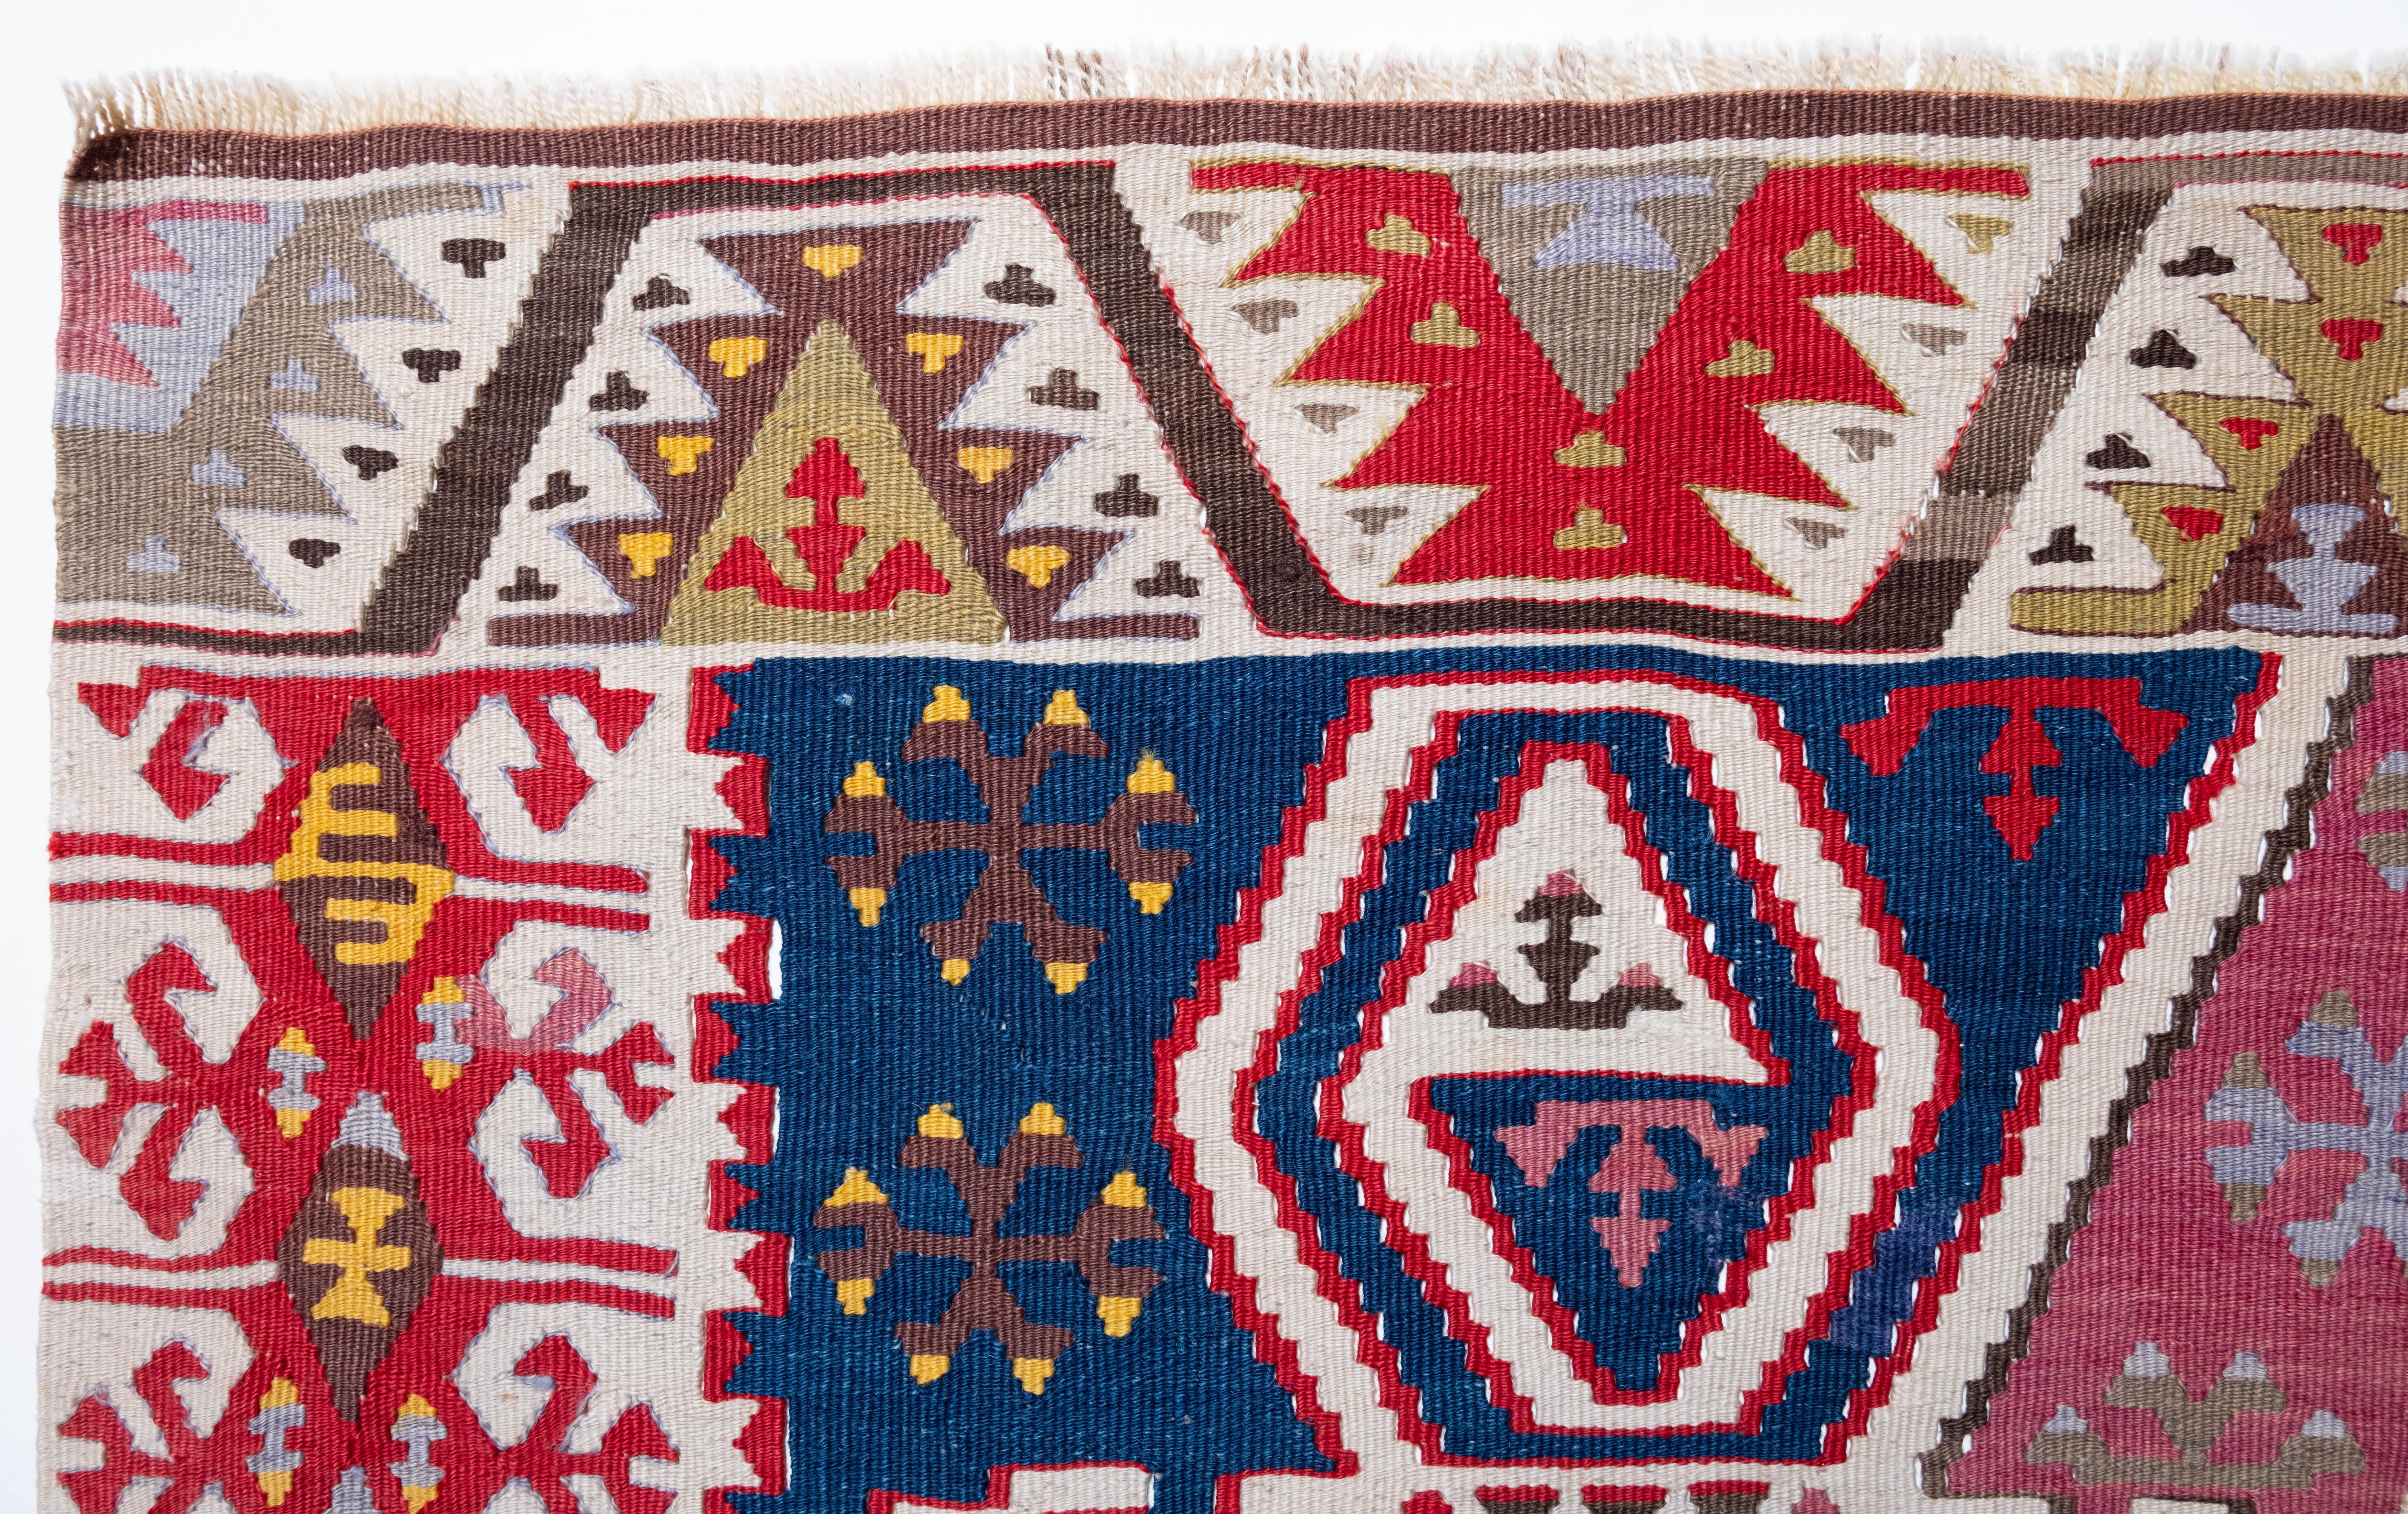 This is Central Anatolian Antique Kilim from the Konya region with a rare and beautiful color composition.

This highly collectible antique kilim has wonderful special colors and textures that are typical of an old kilim in good condition. It is a